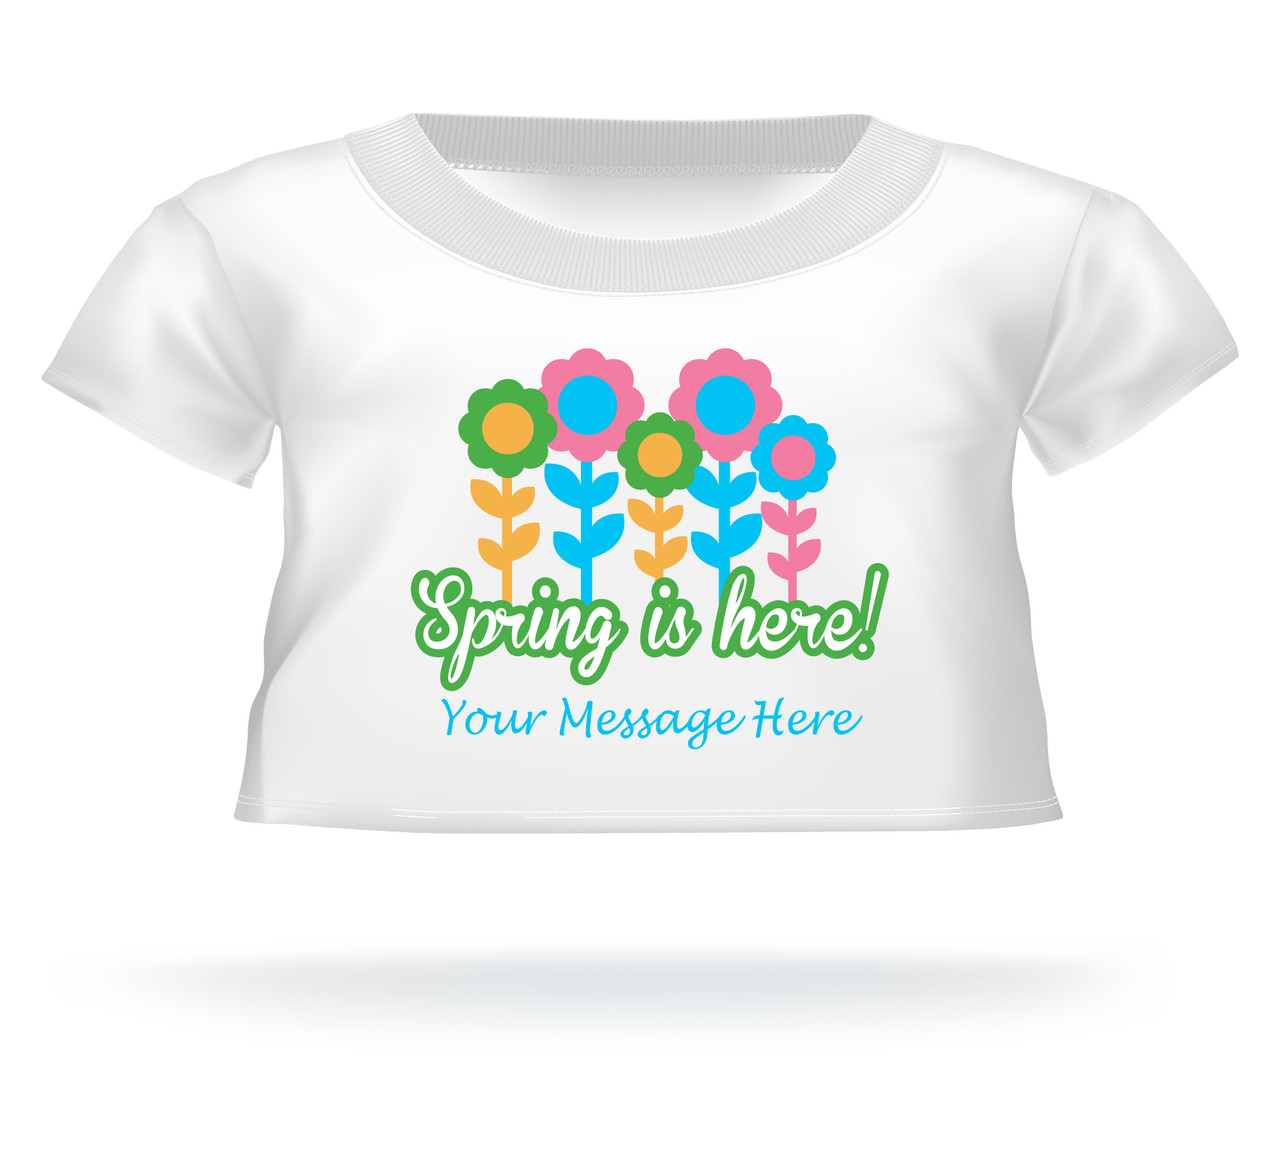 “Spring is here!” w/flowers Giant Teddy Personalized Bear shirt